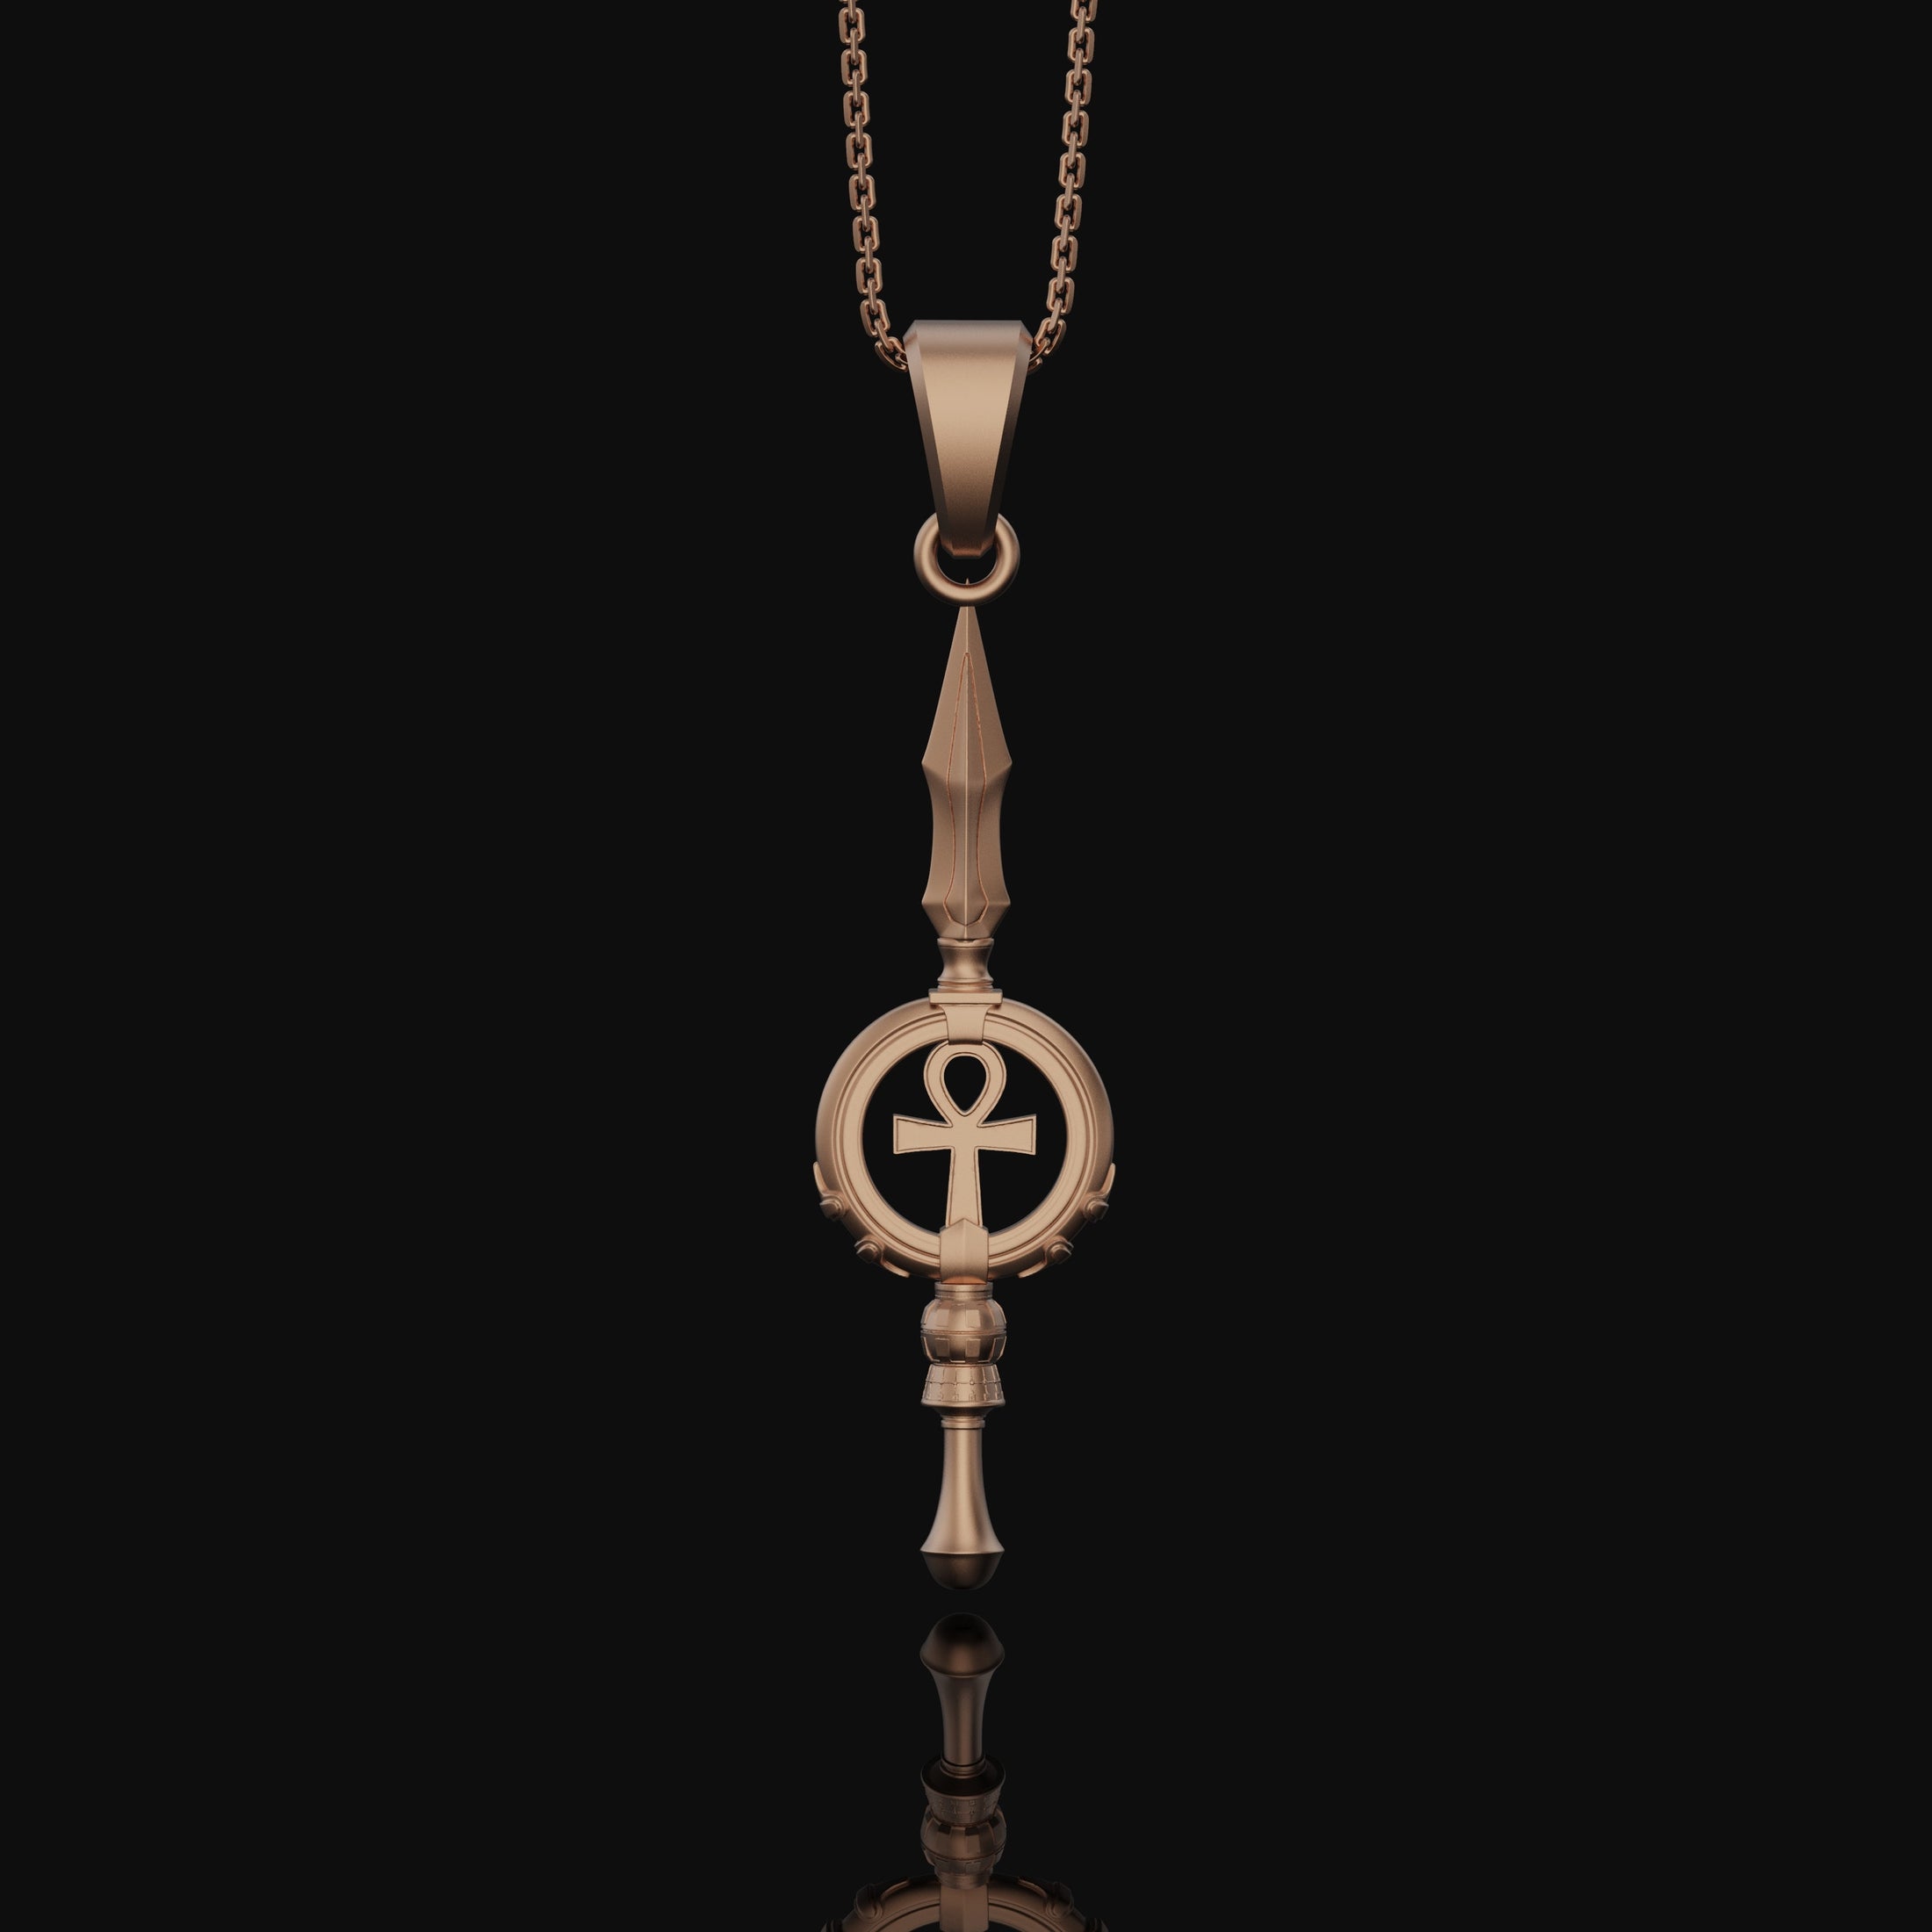 Silver Ankh Key Spear Charm Necklace - Elegant Ancient Egyptian Style, Spiritual Life Symbol, Warrior Inspired Jewelry Rose Gold Finish